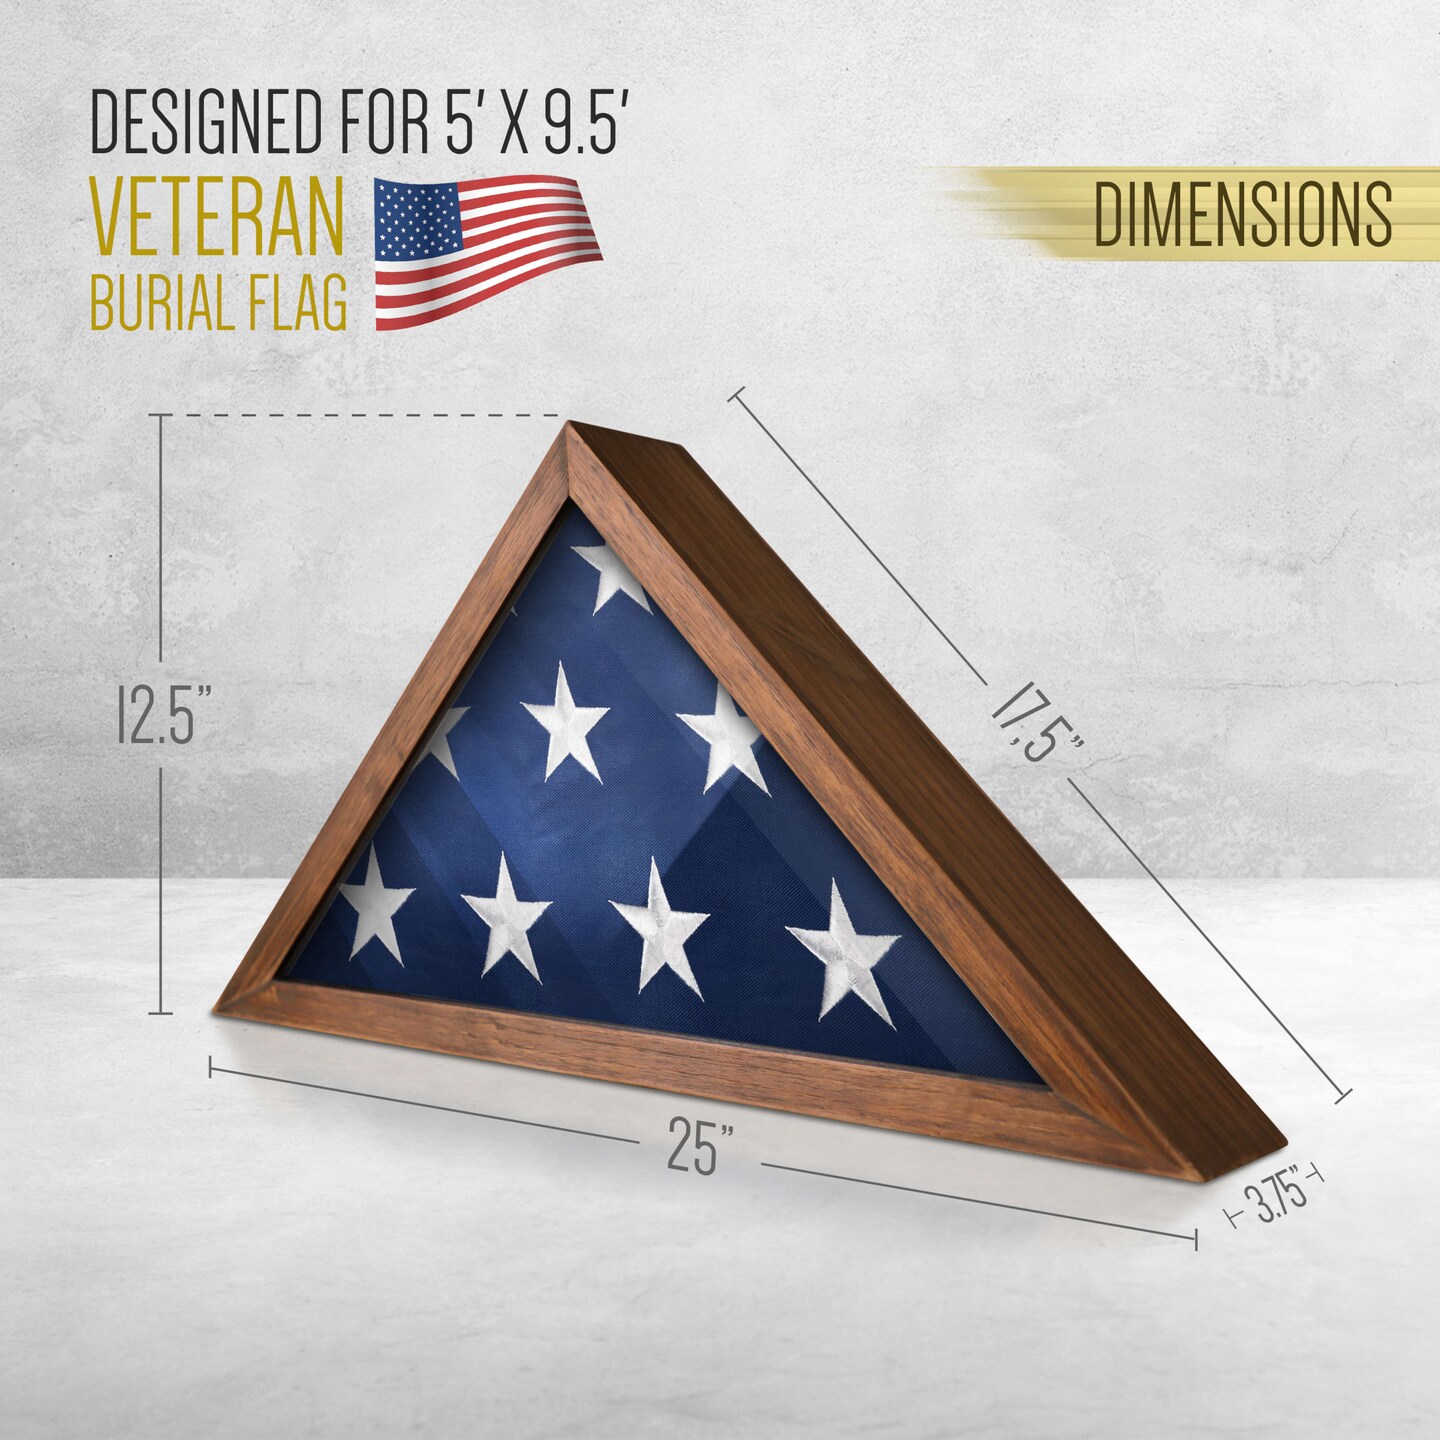 HBCY Creations Rustic Flag Case - SOLID WOOD Military Flag Display Case for 9.5 x 5 American Veteran Burial Flag, Wall Mounted Burial Flag Frame